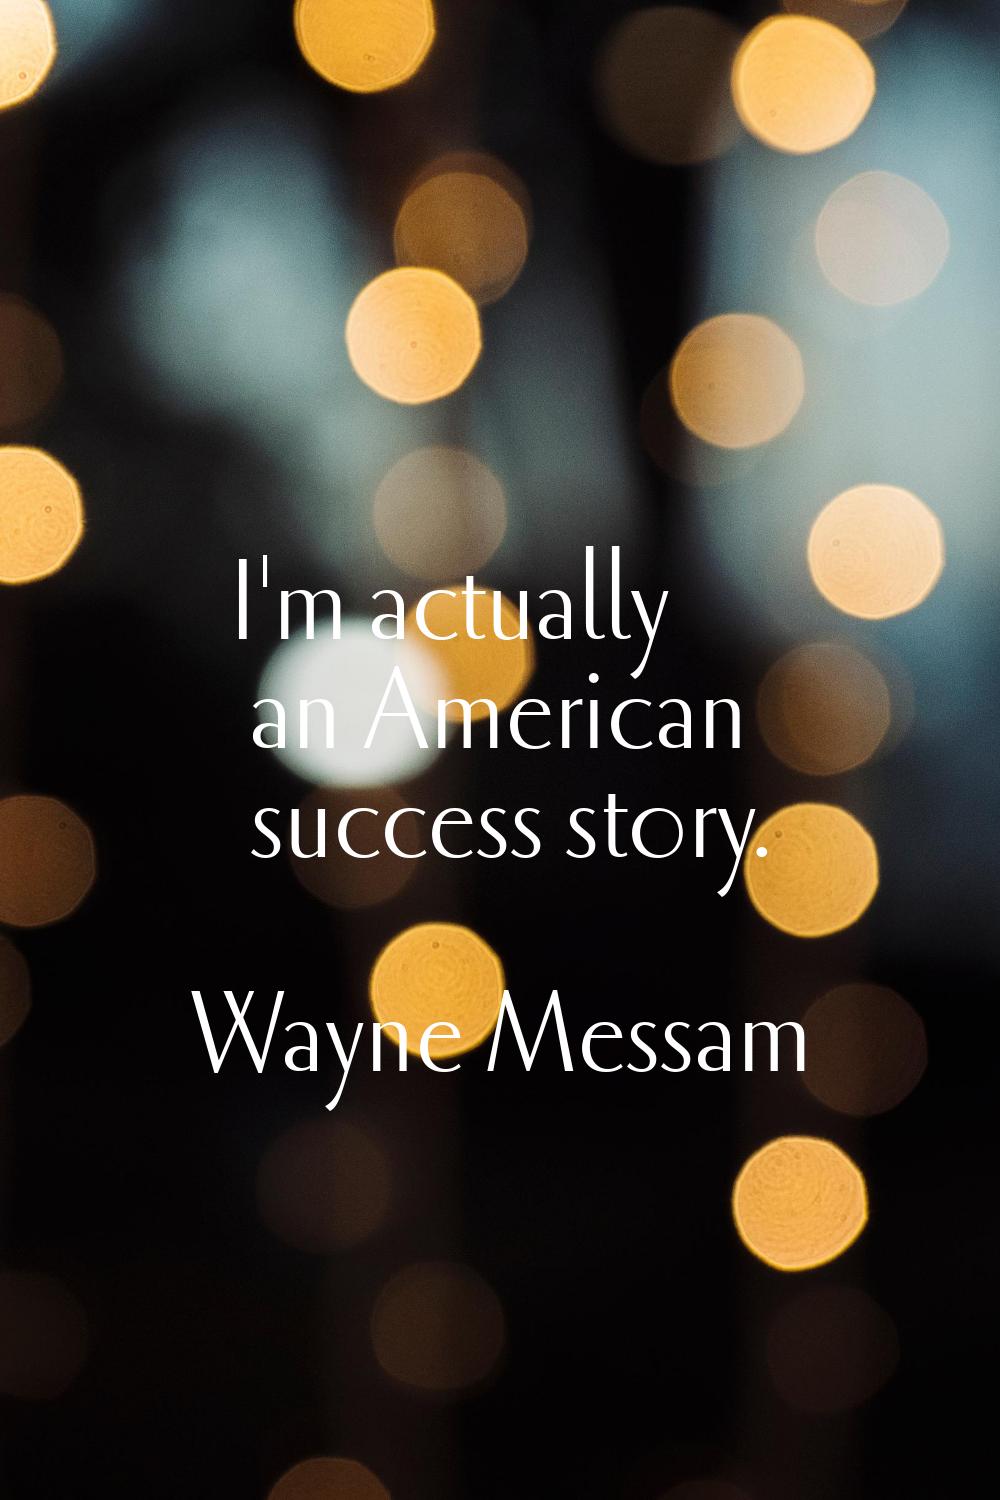 I'm actually an American success story.